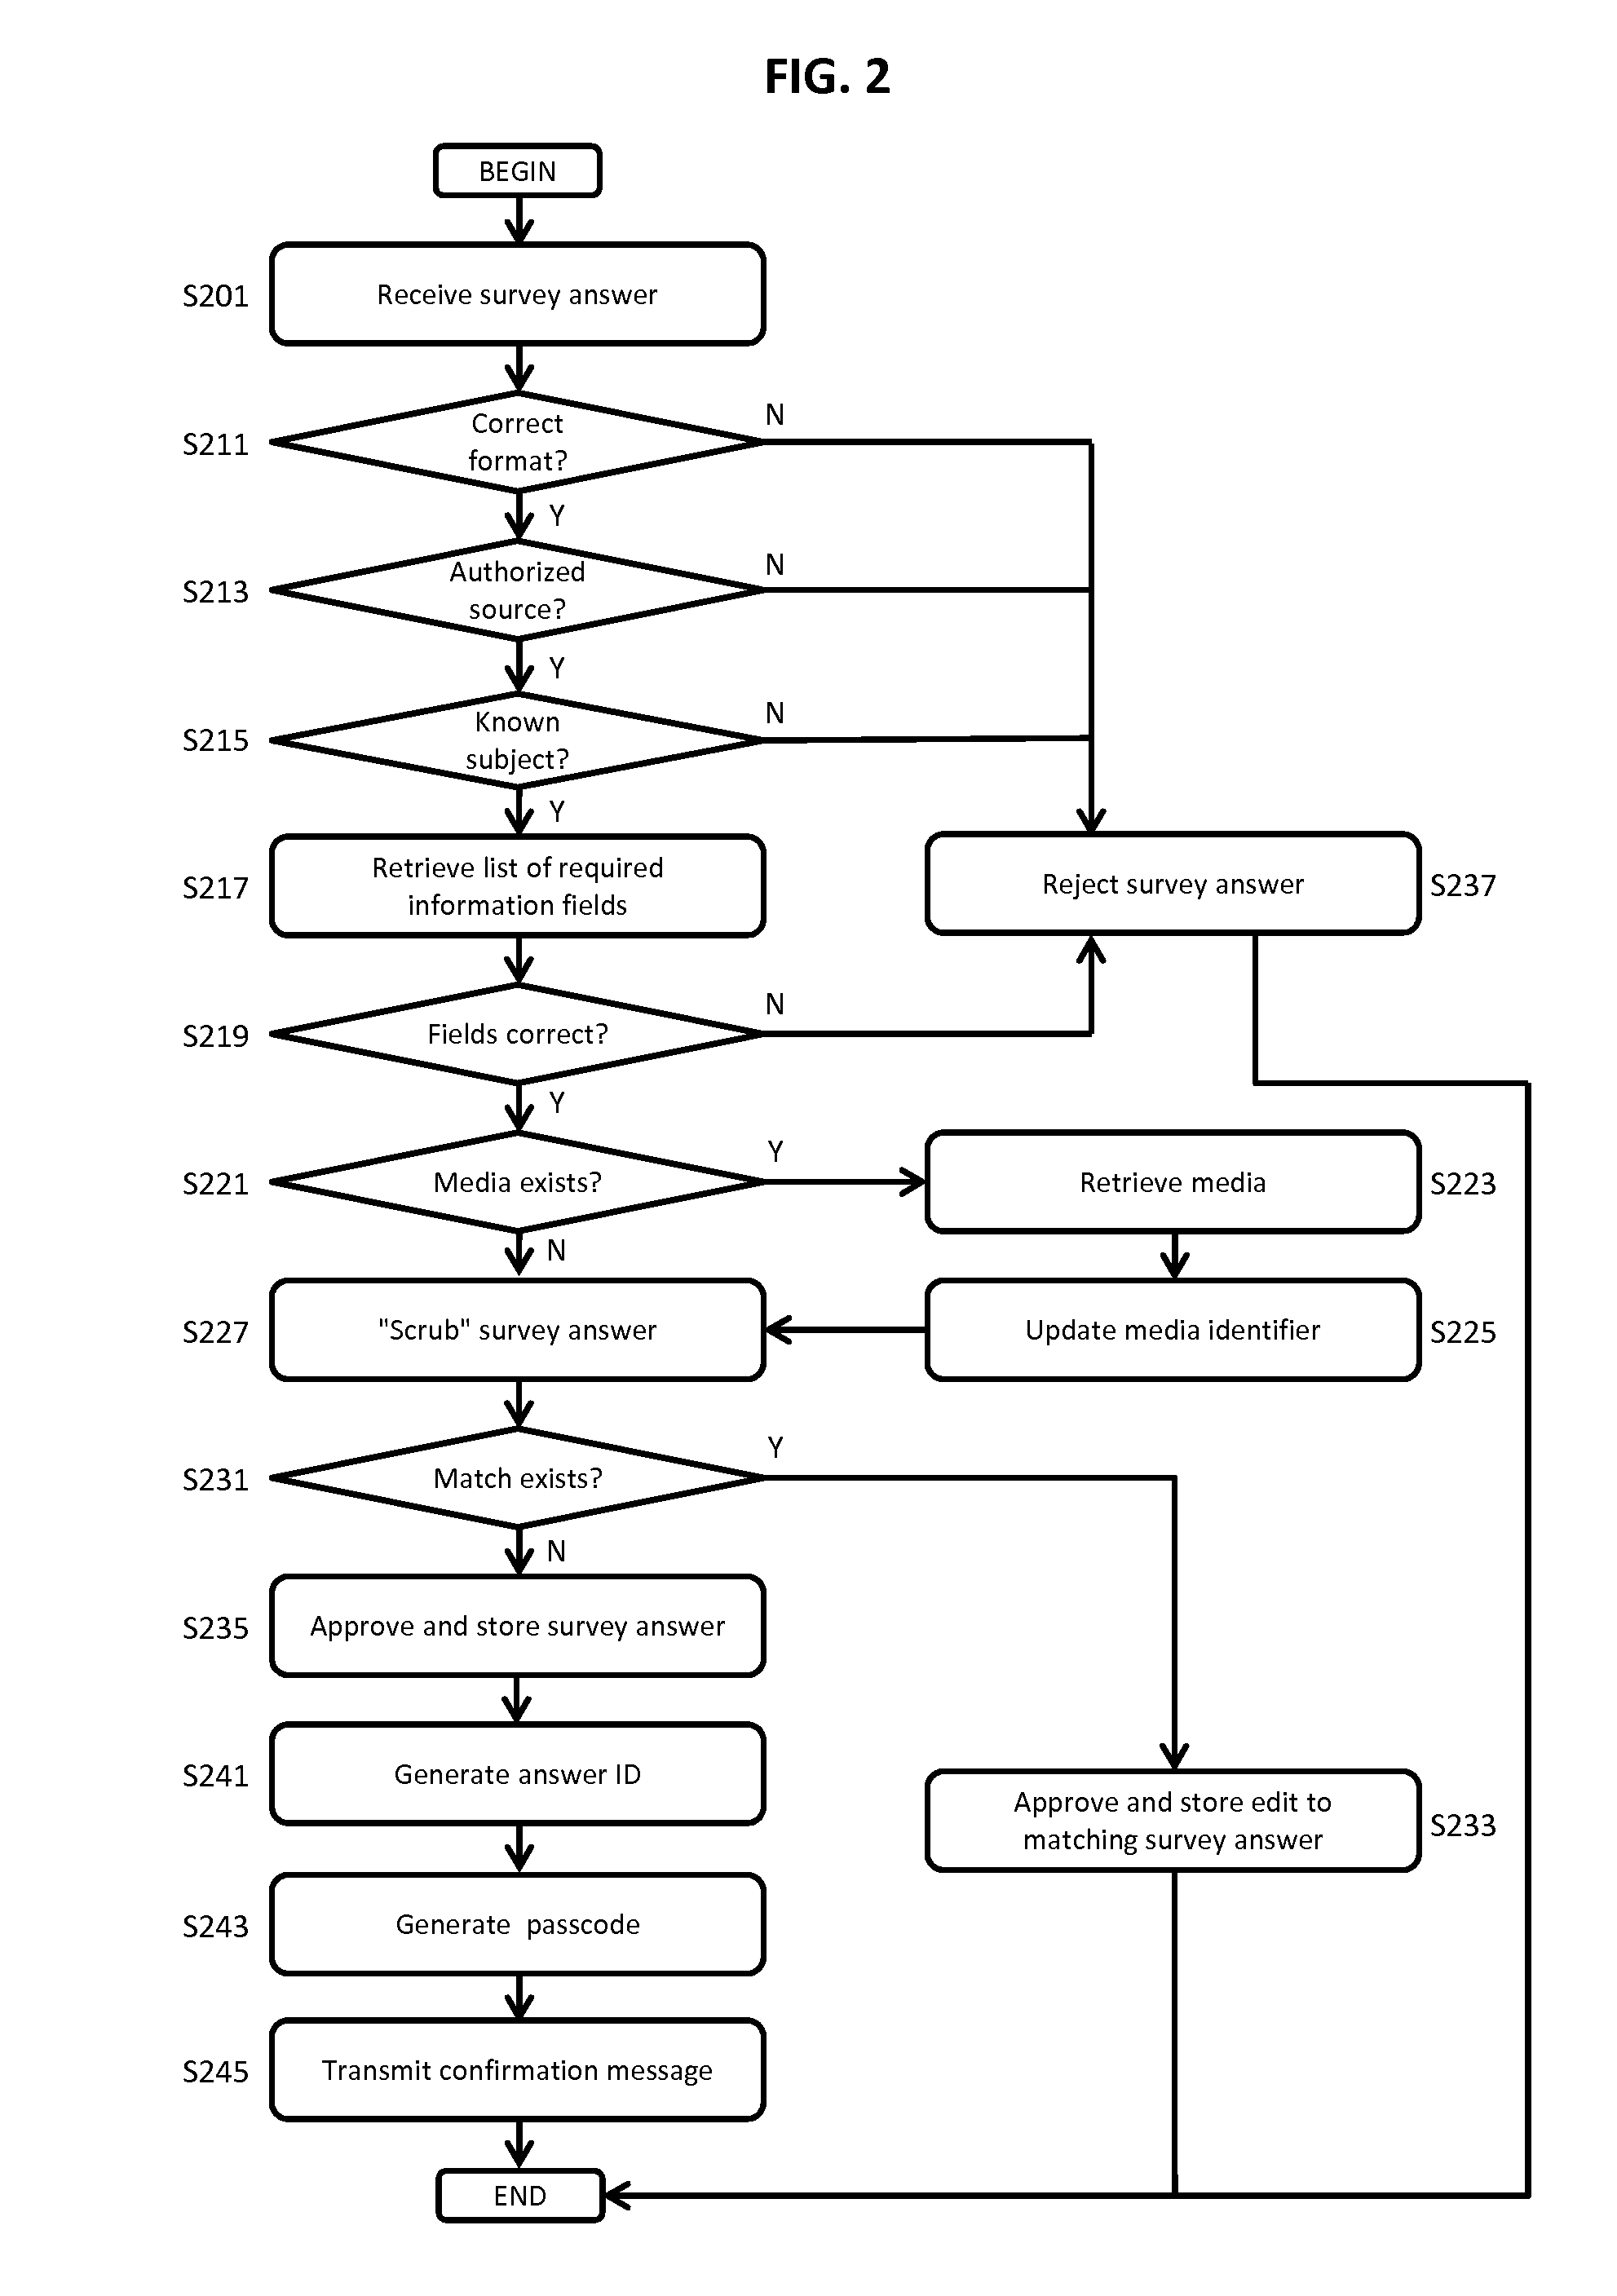 Systems and Methods for Receiving, Aggregating, and Editing Survey Answers from Multiple Sources